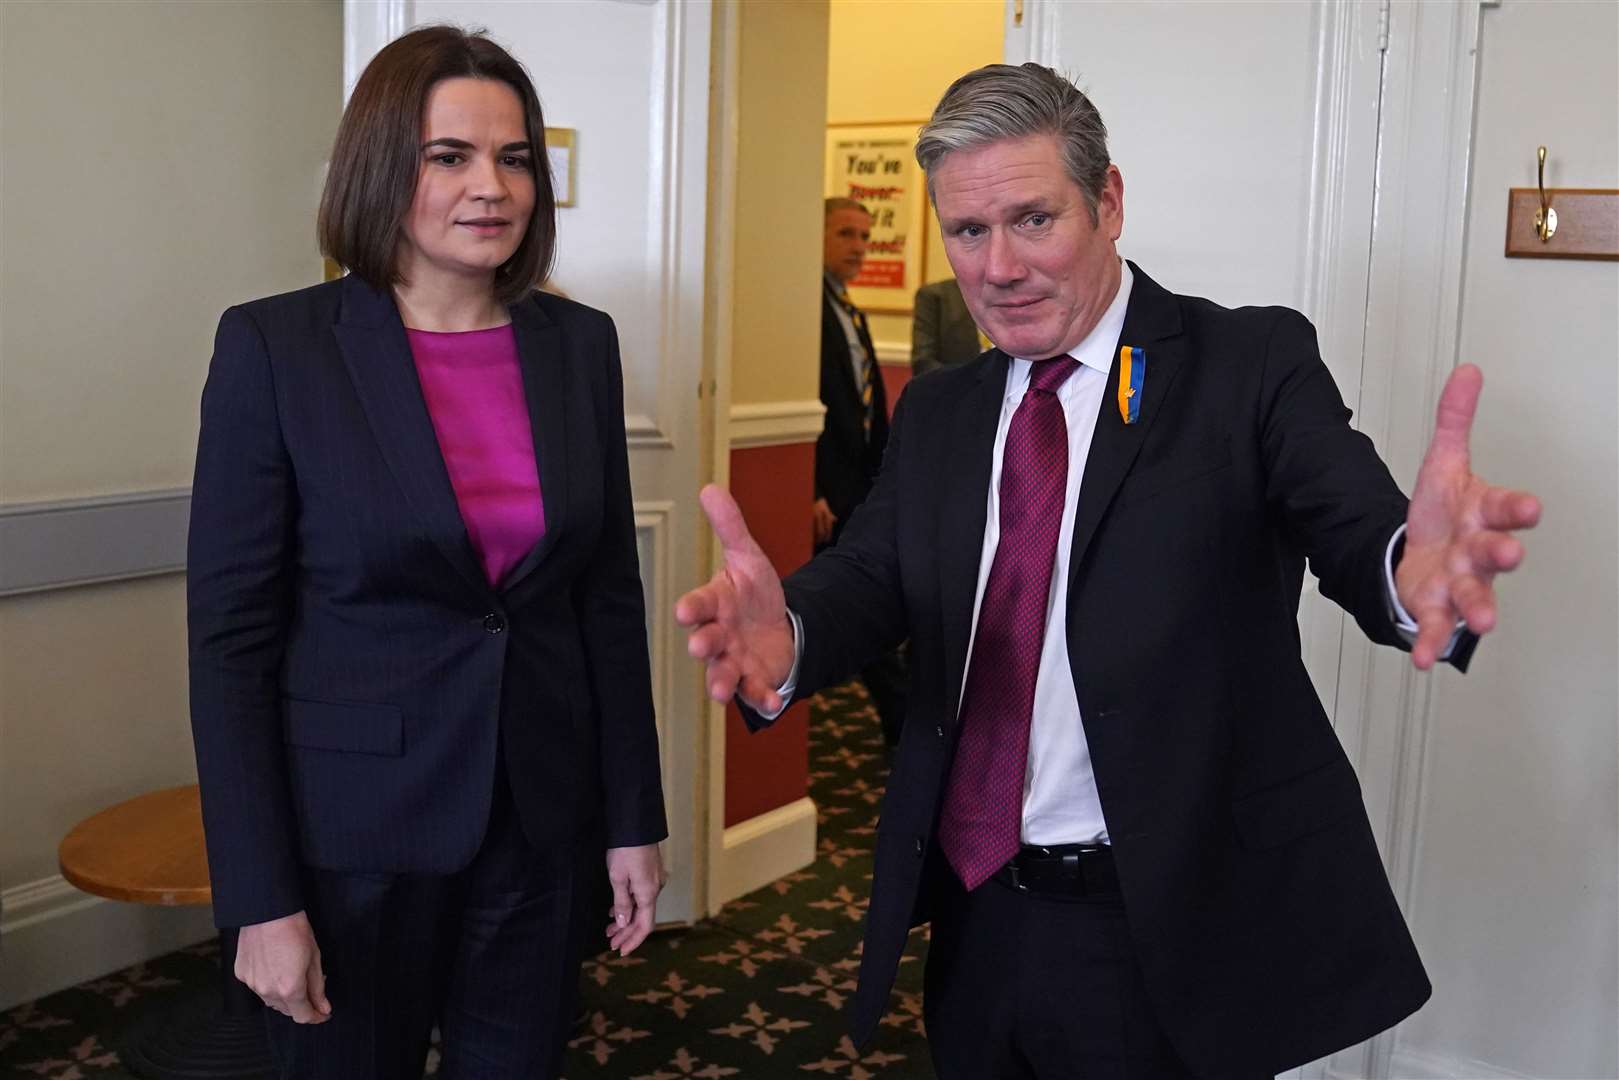 Labour leader Sir Keir Starmer met Belarusian opposition leader Sviatlana Tsikhanouskaya at his office in the House of Commons in March (Stefan Rousseau/PA)